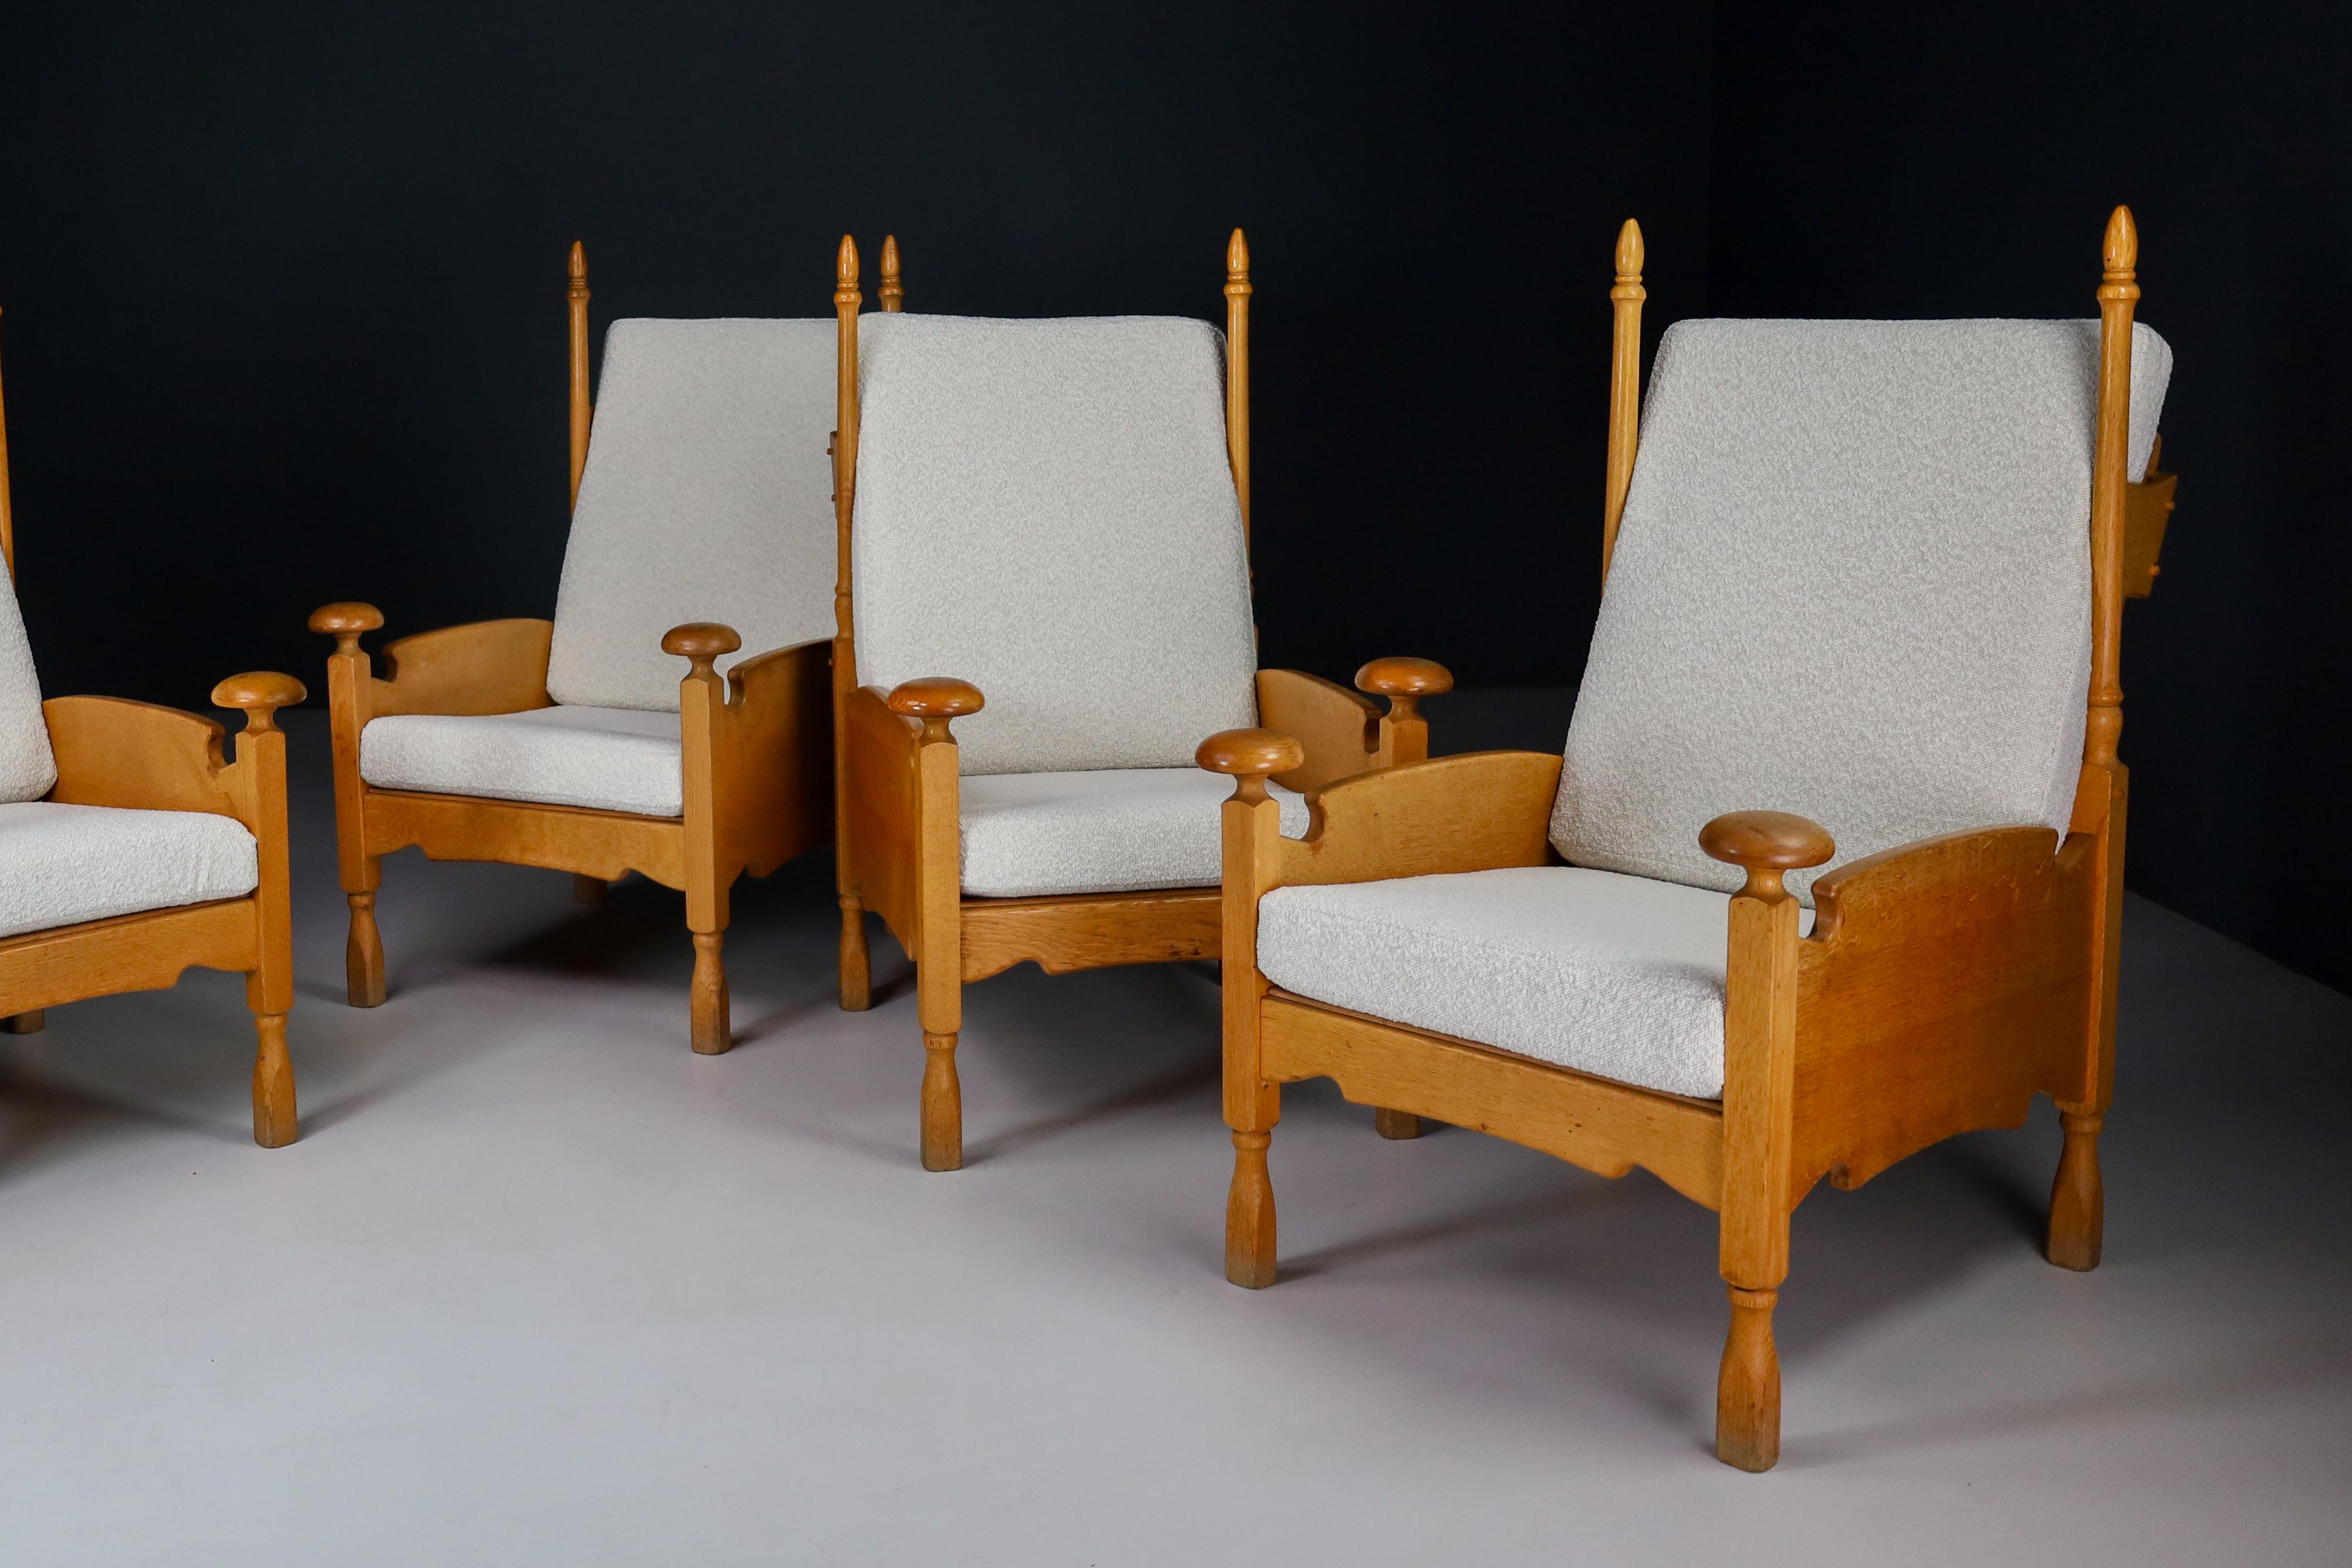 Set of four high back armchairs, in blond solid French oak and Re-upholstered Boucle wool fabric. Made in France, 1950s. The grain of the wood is nicely visible, especially on the elegant sculpted armrests and back . These high back armchairs would